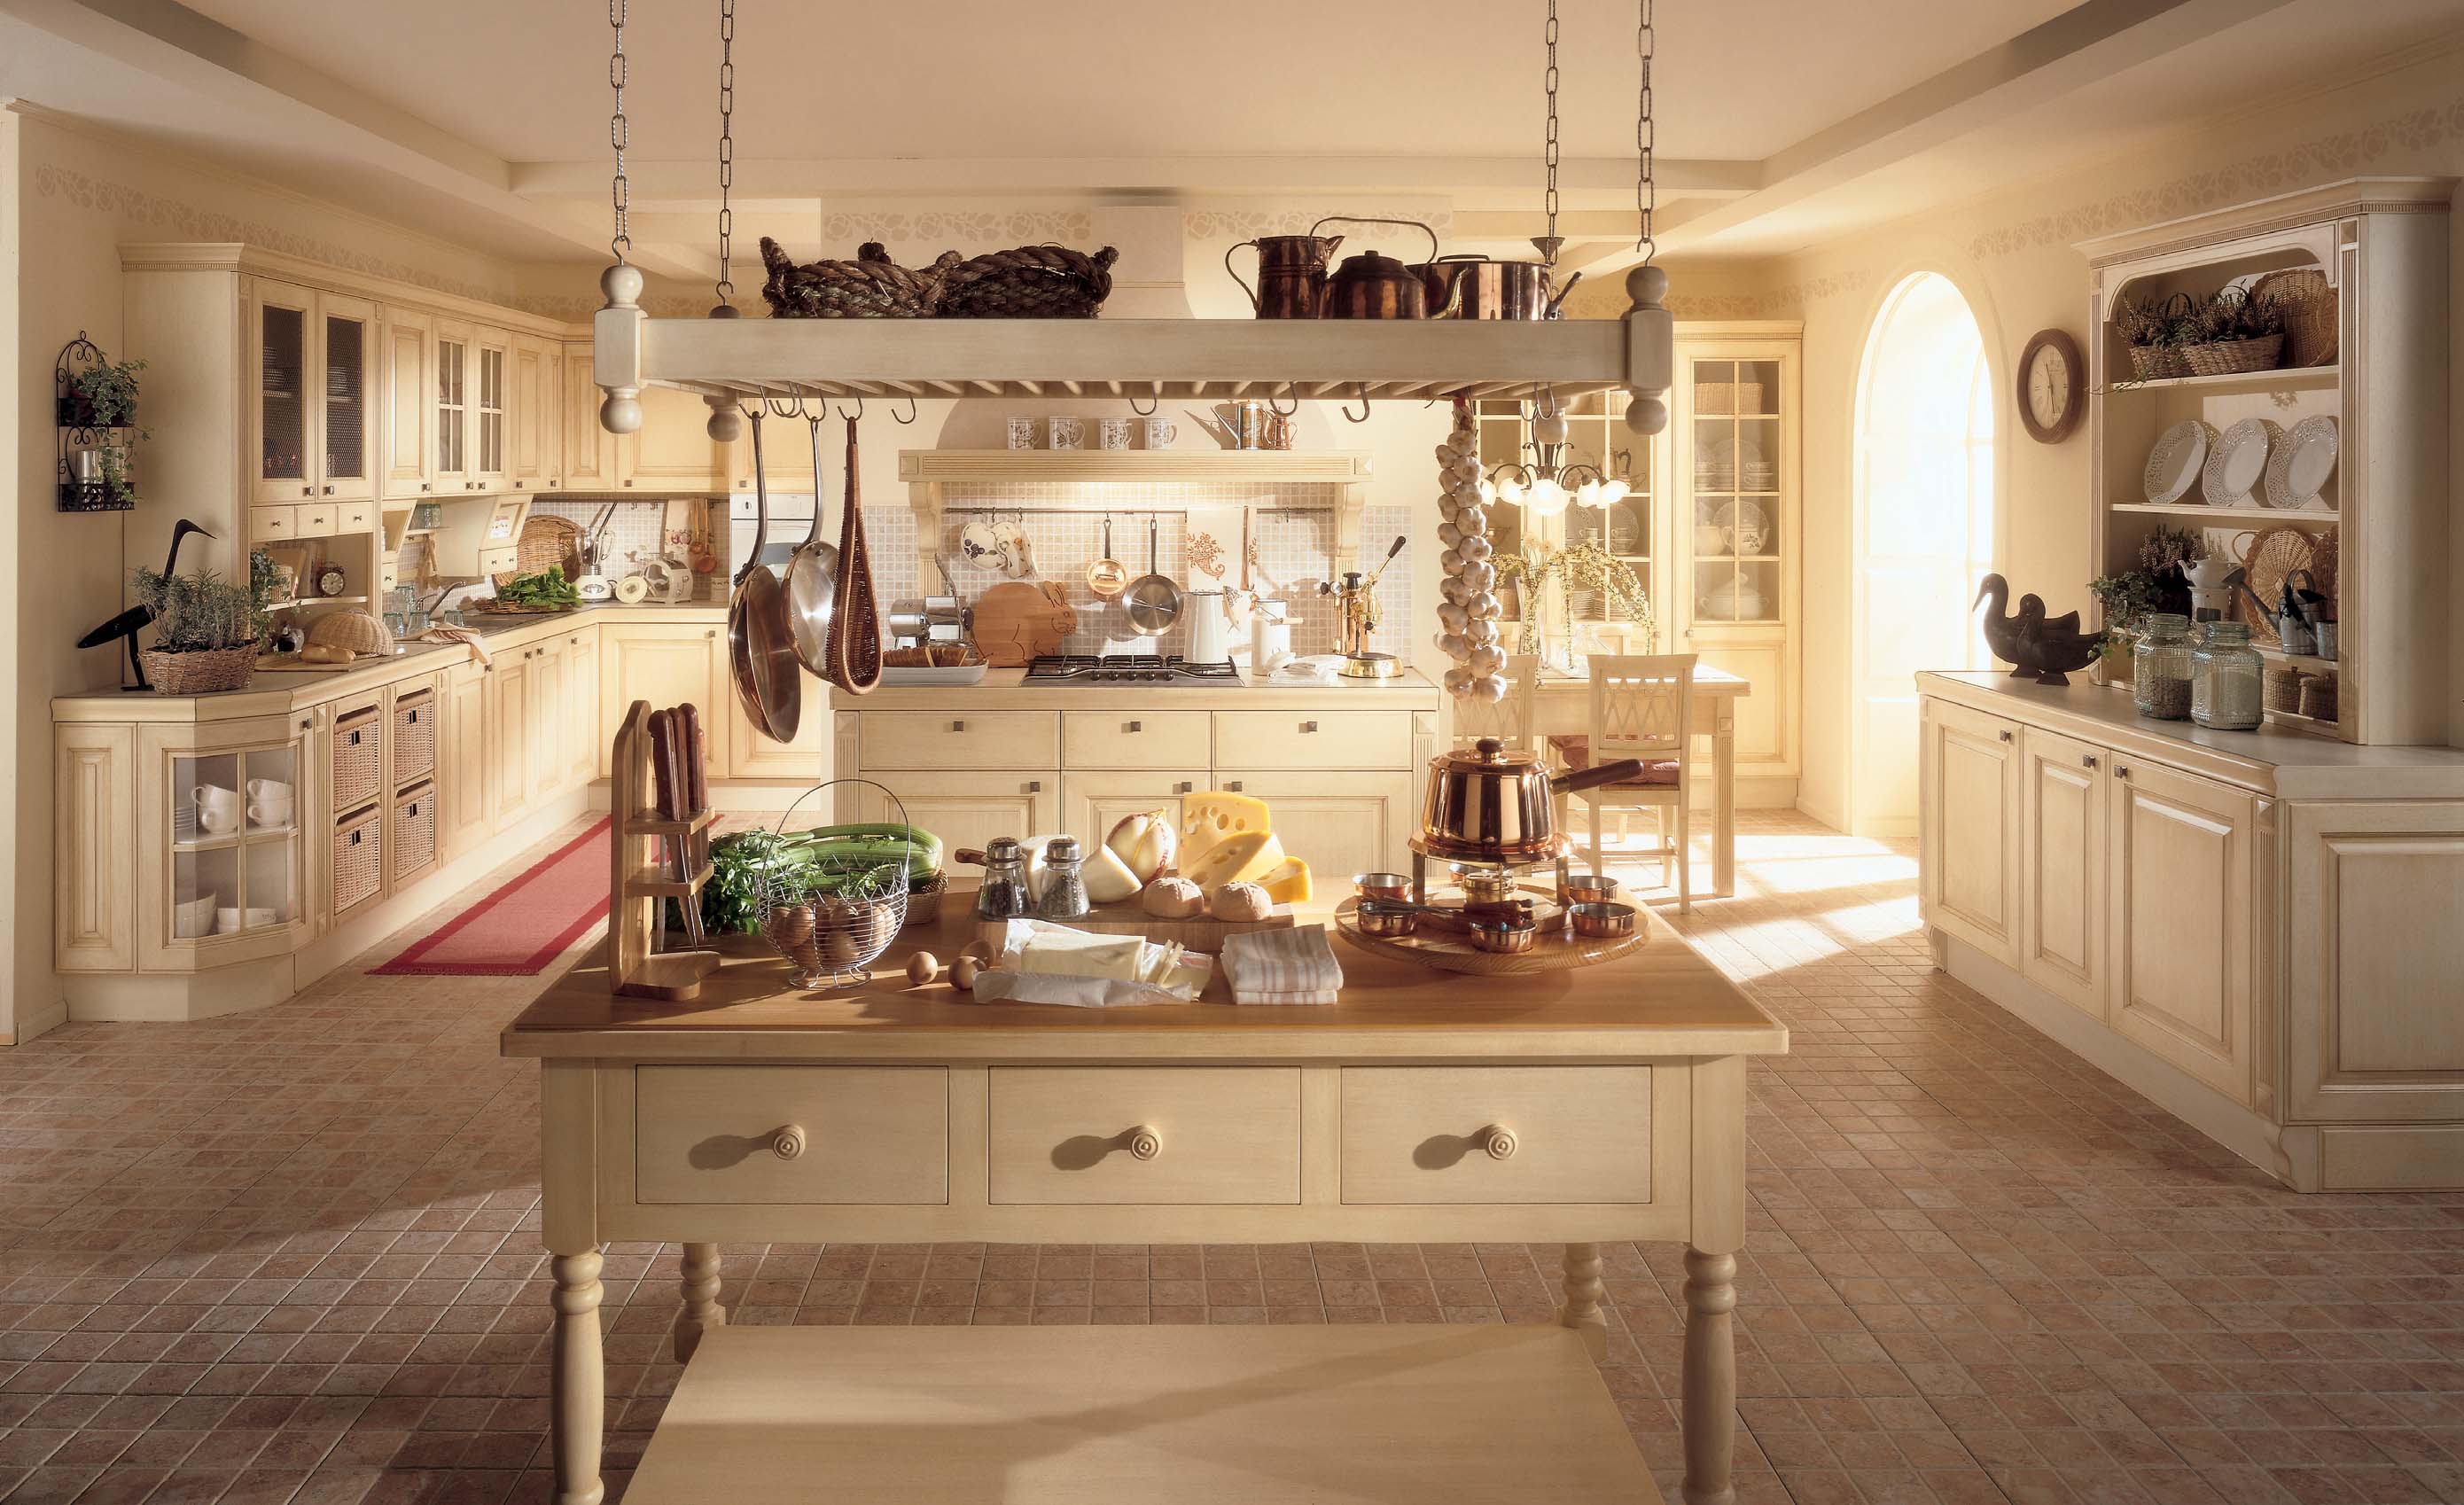 classic country kitchen designs photo - 10